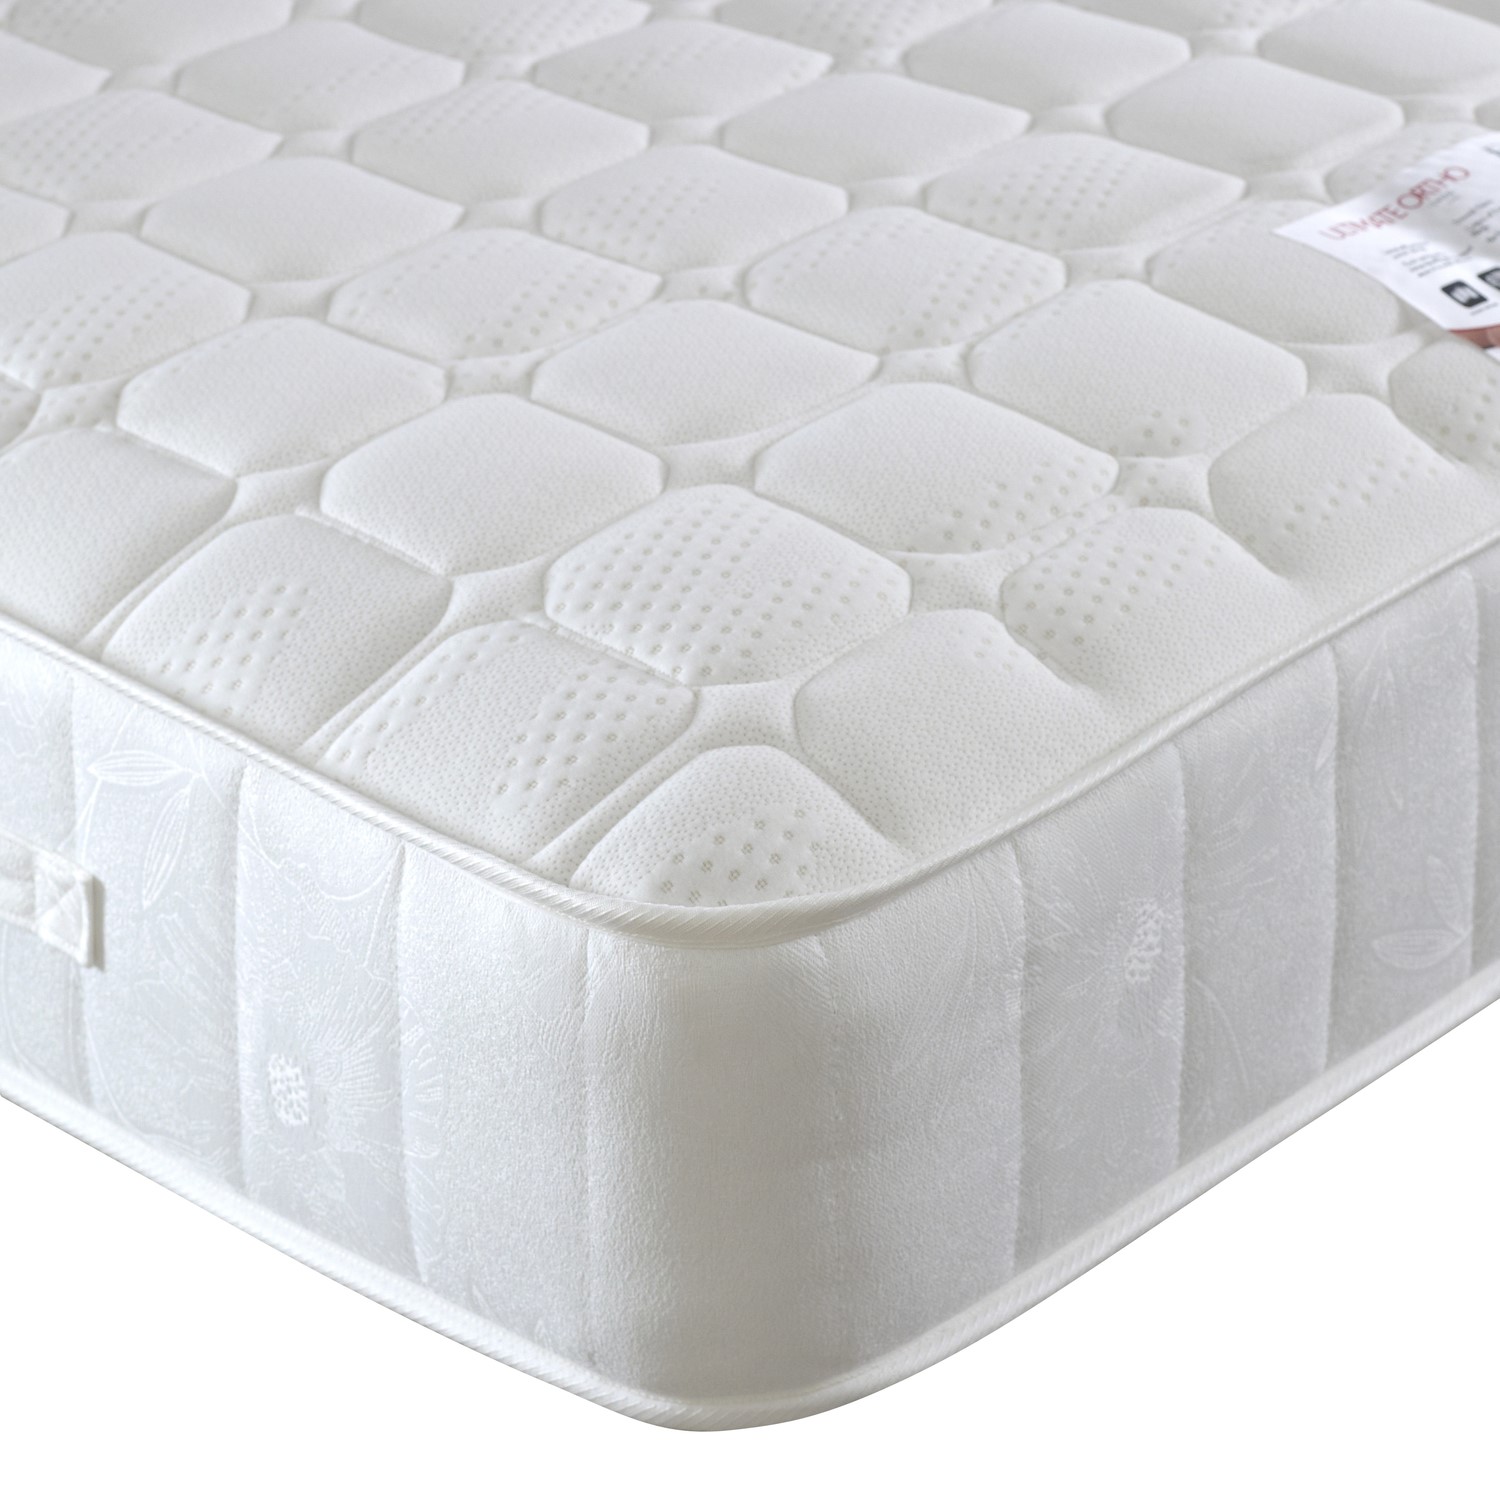 Photo of Single orthopaedic 1000 pocket sprung quilted mattress - ultimate ortho